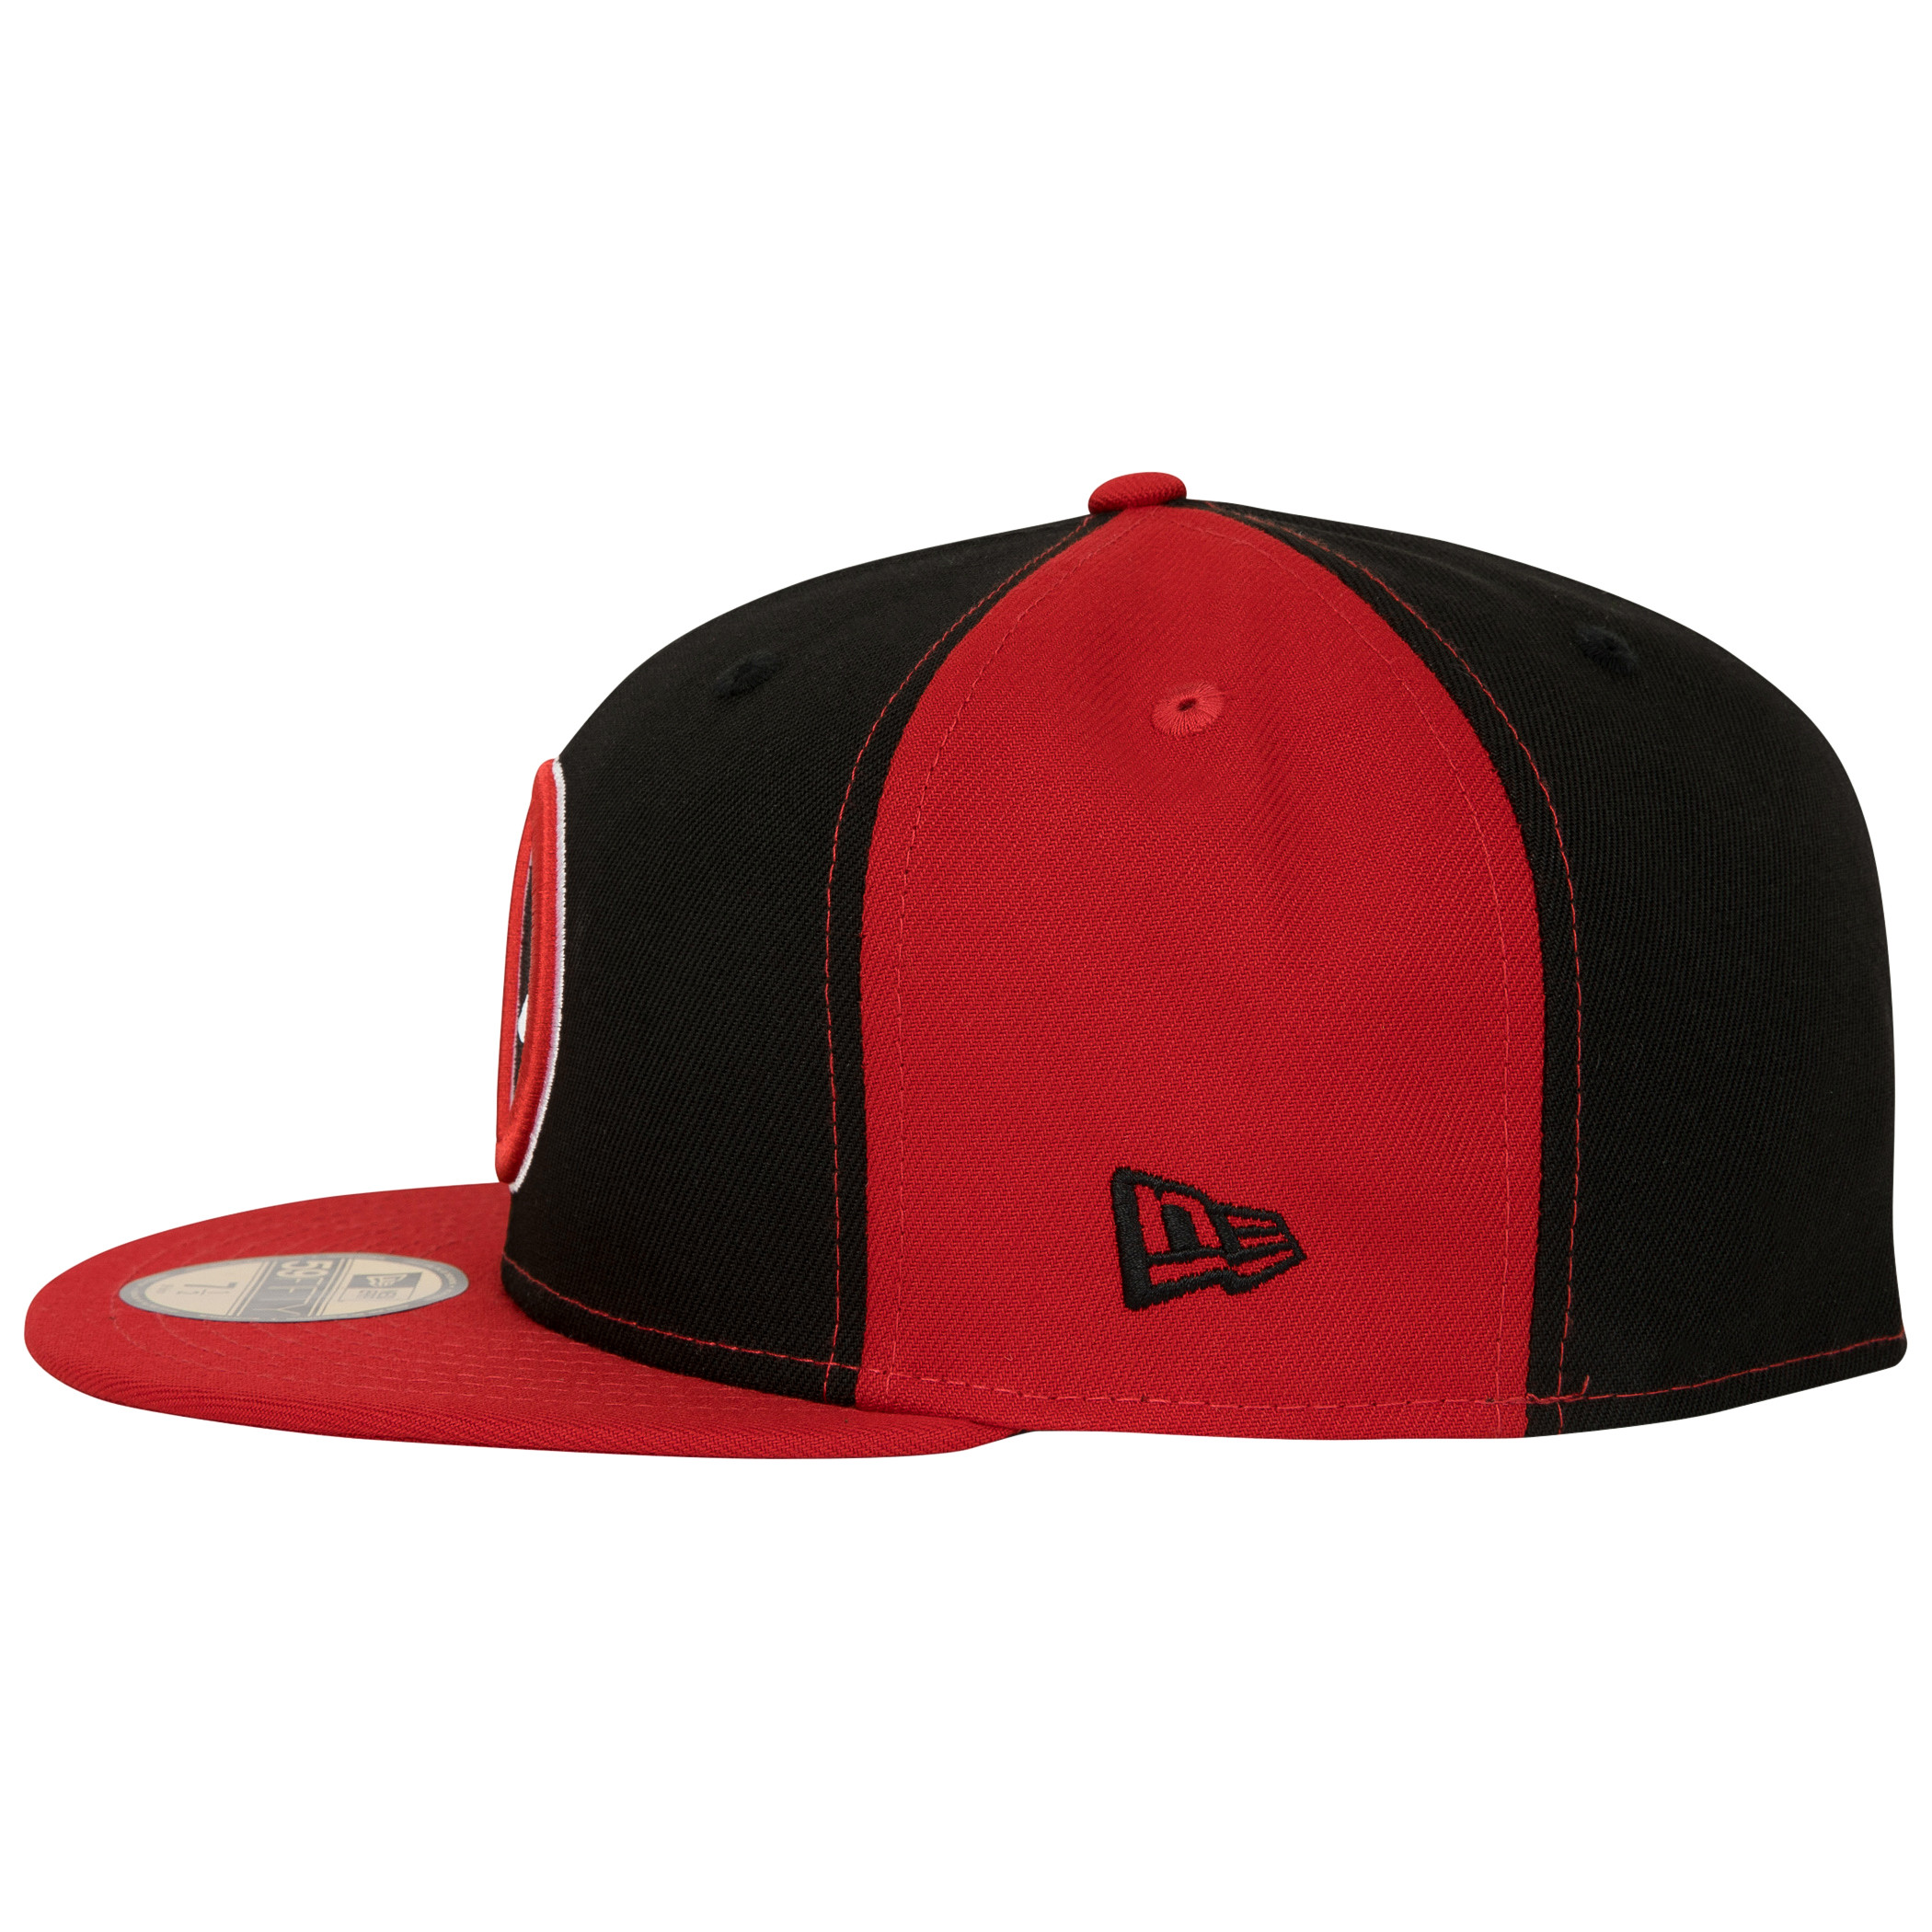 Deadpool Logo Black & Red Panels New Era 59Fifty Fitted Hat